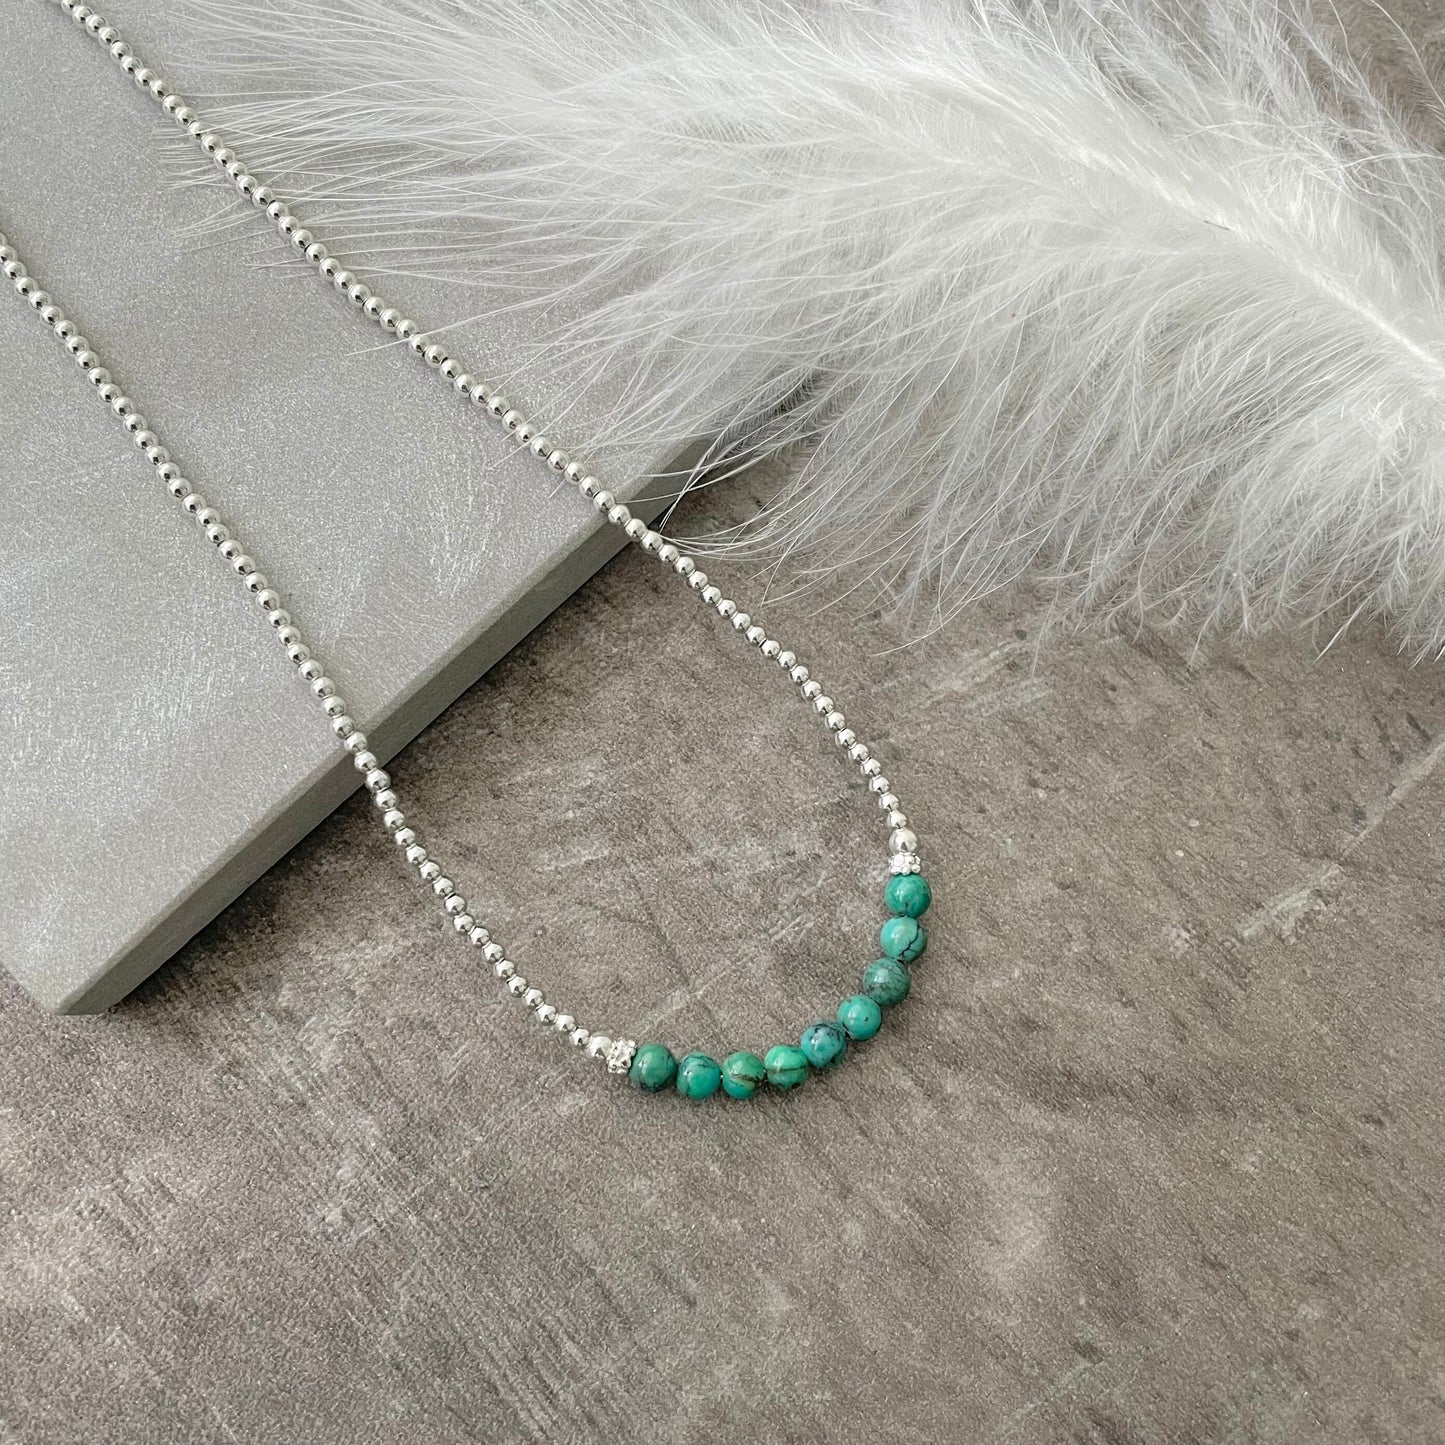 Thin Turquoise and Sterling Silver Bead Necklace, December Birthstone